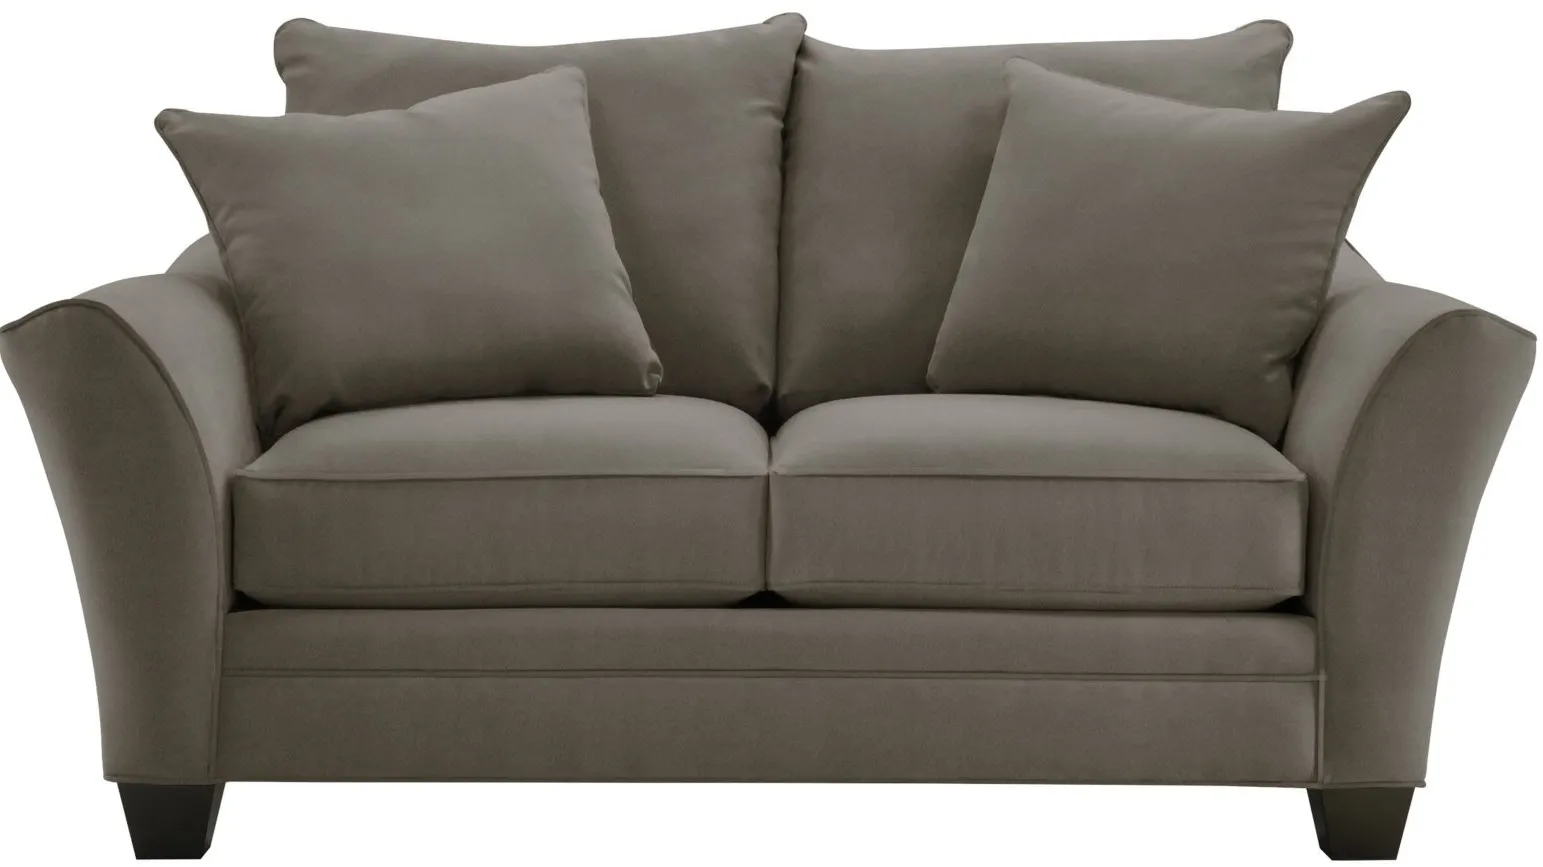 Briarwood Apartment Sofa in Suede So Soft Graystone by H.M. Richards